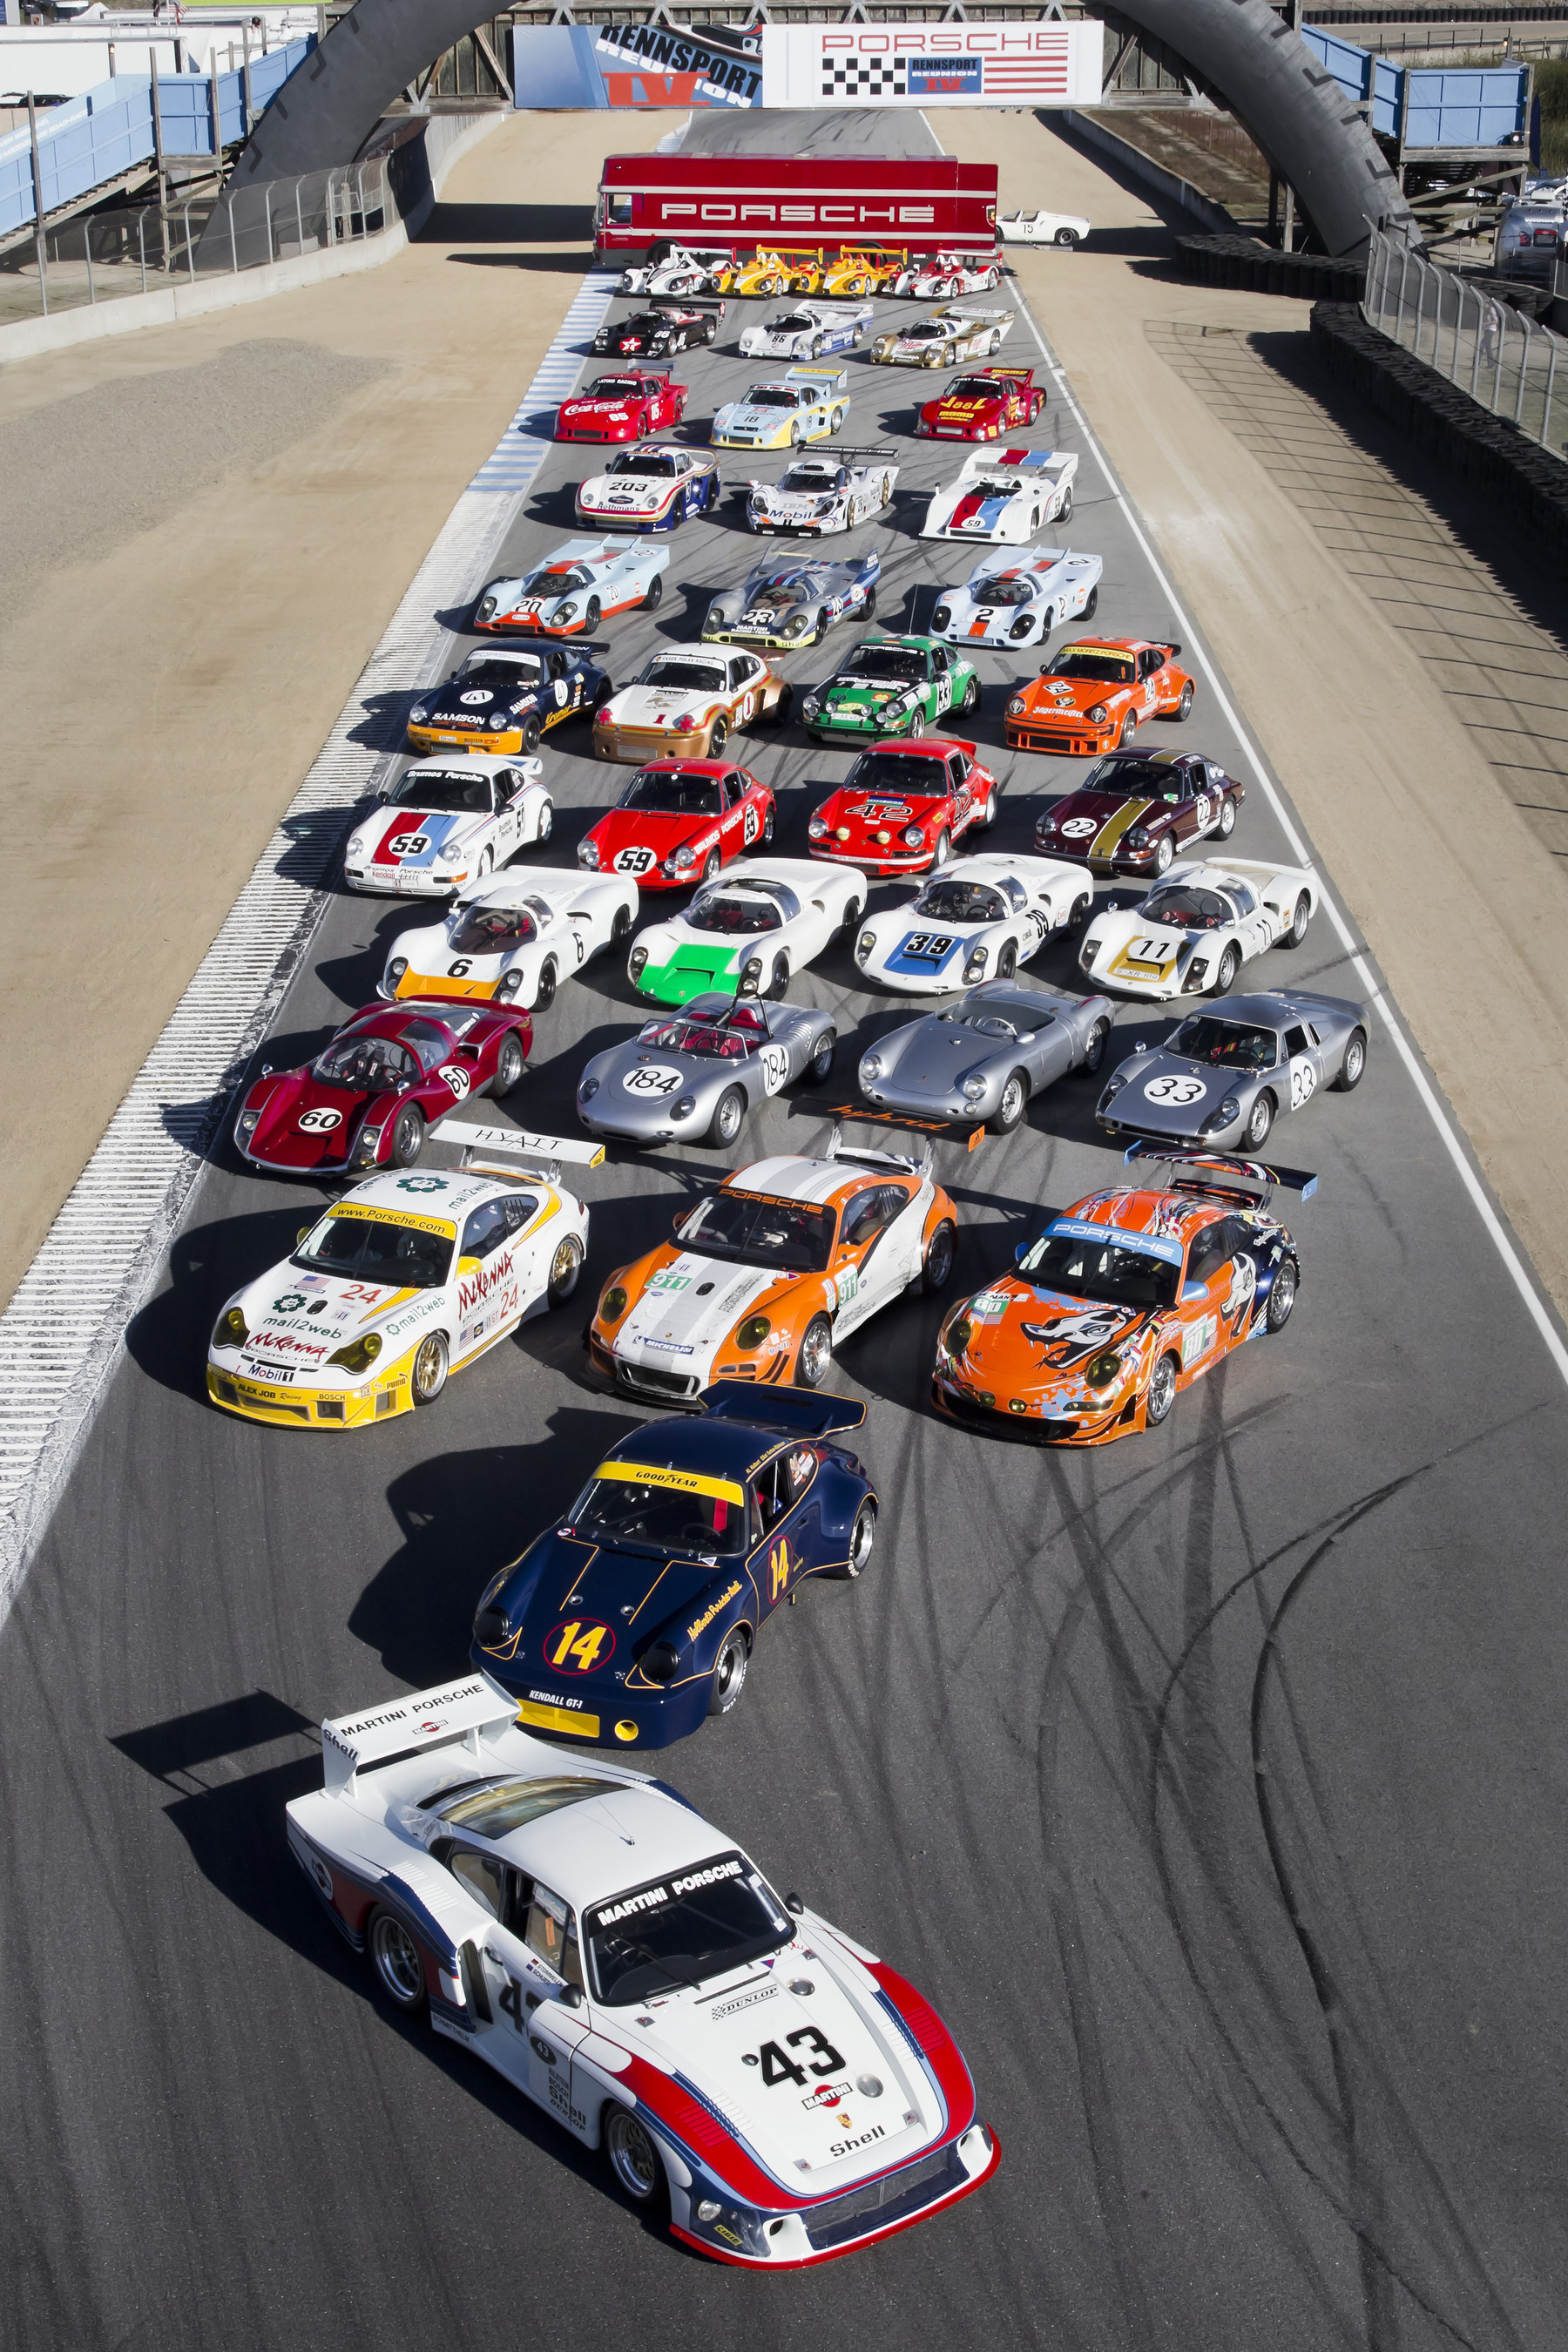 The world's largest gathering of Porsche race cars, drivers and fans moves forward two weeks